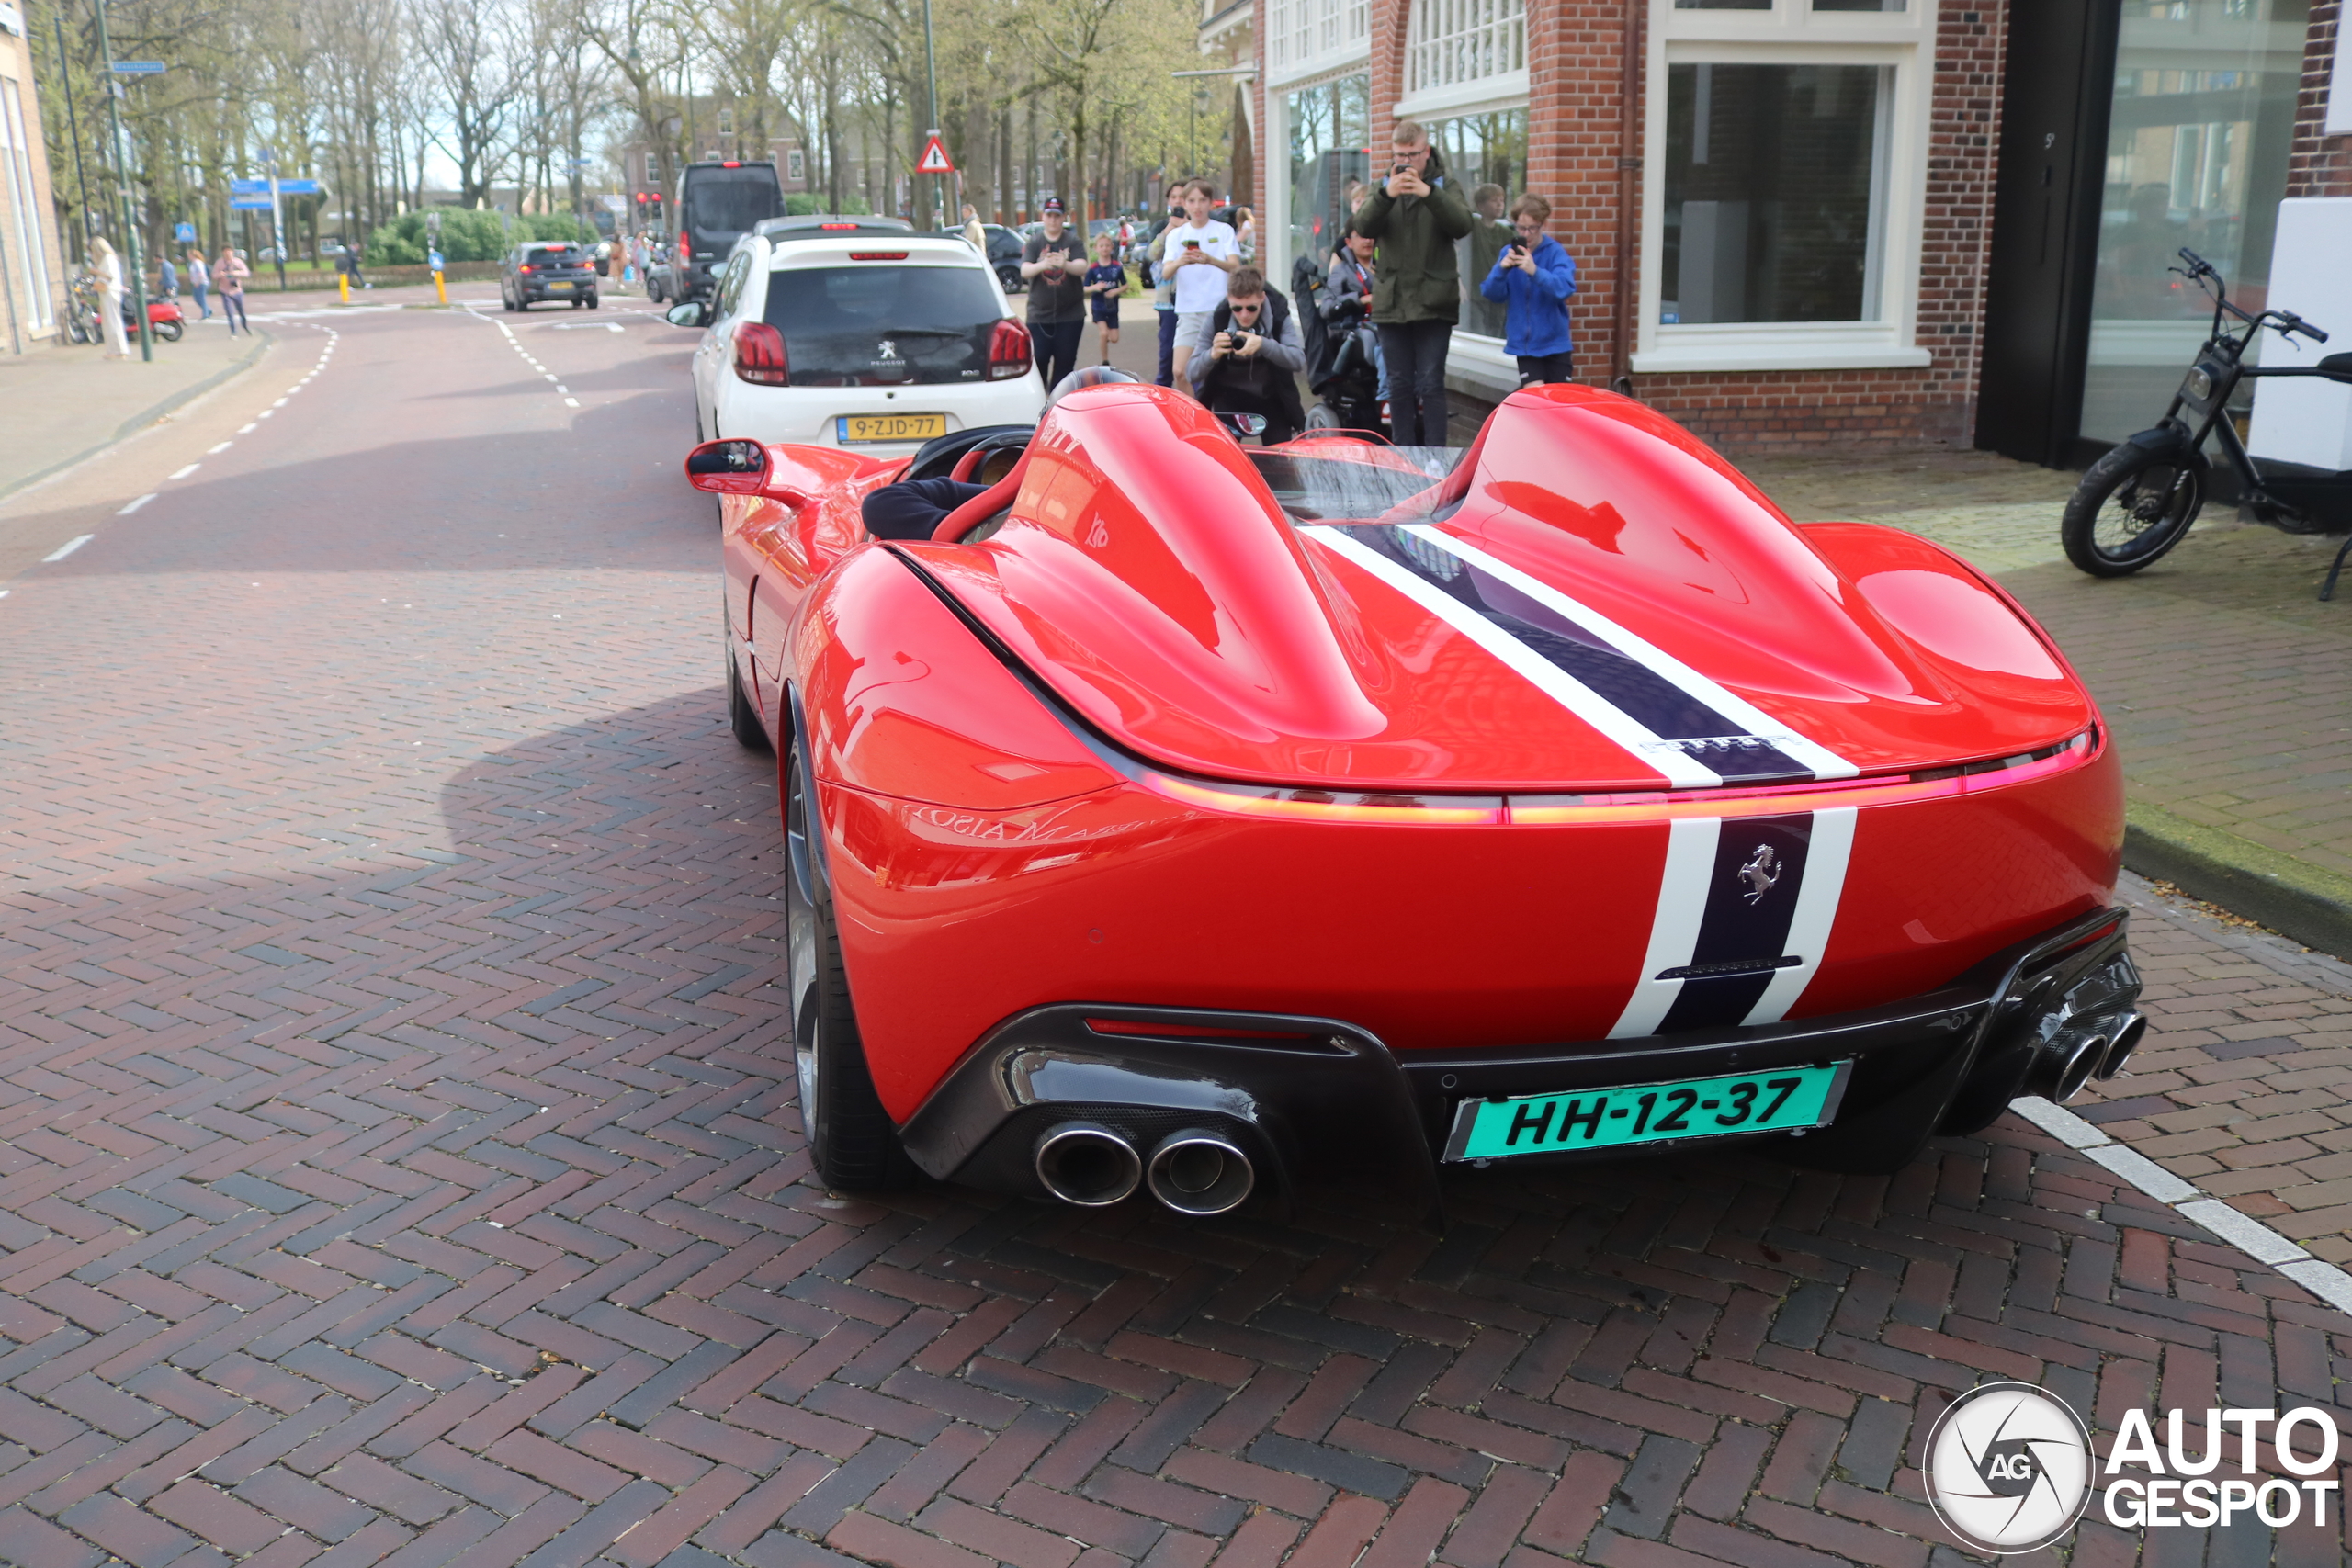 The fourth Monza SP2 from the Netherlands emerges